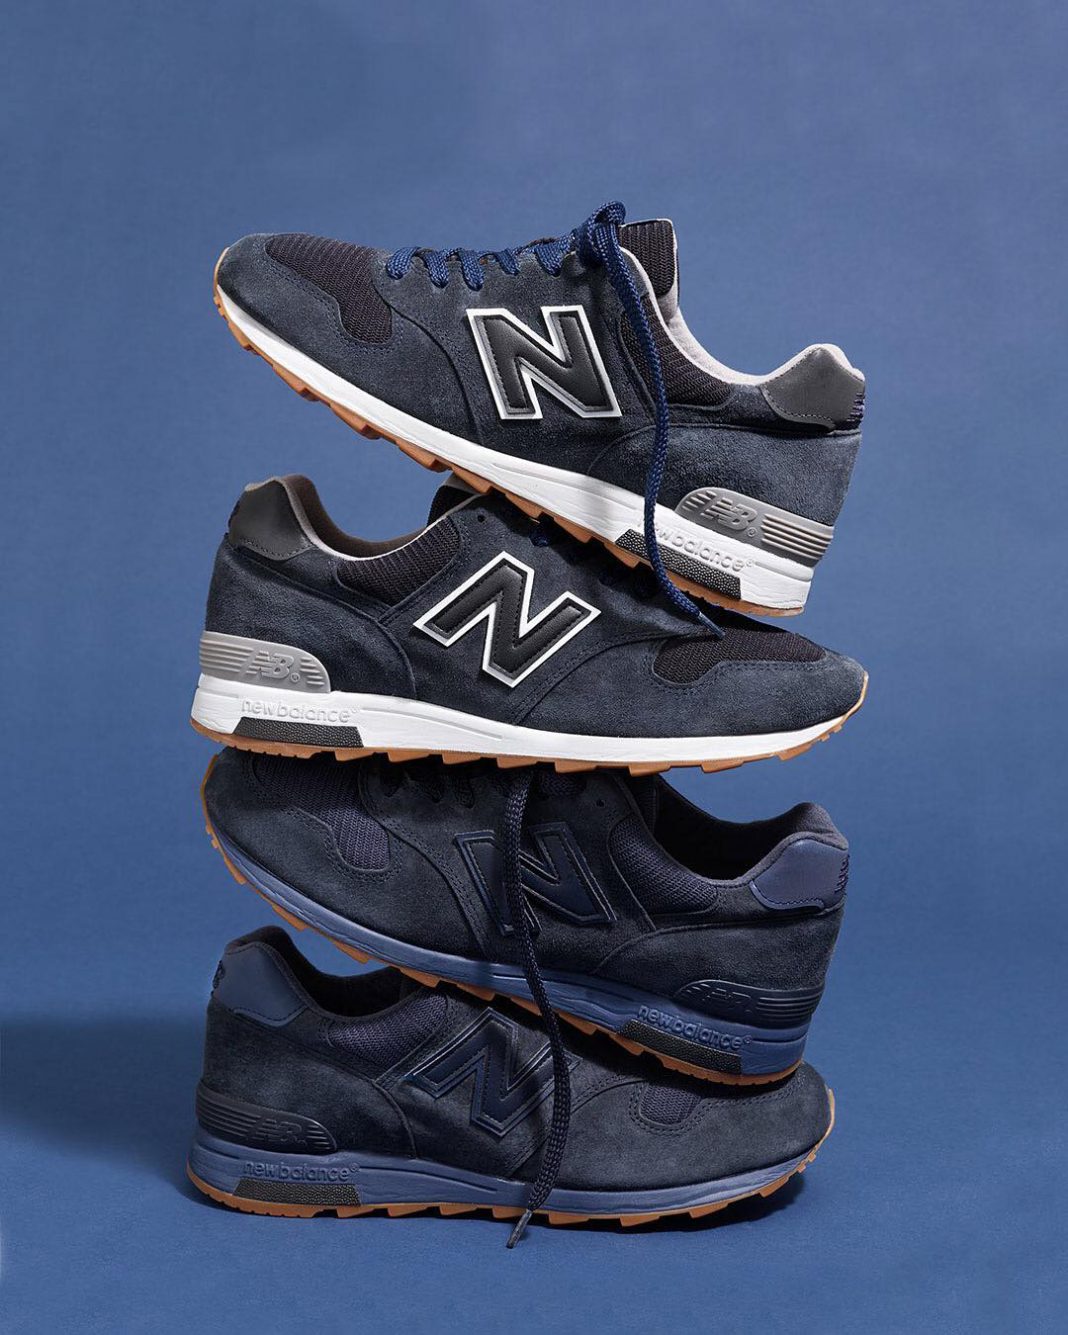 Midnight is here. J.Crew's latest collaboration with New Balance sees a dark nav...